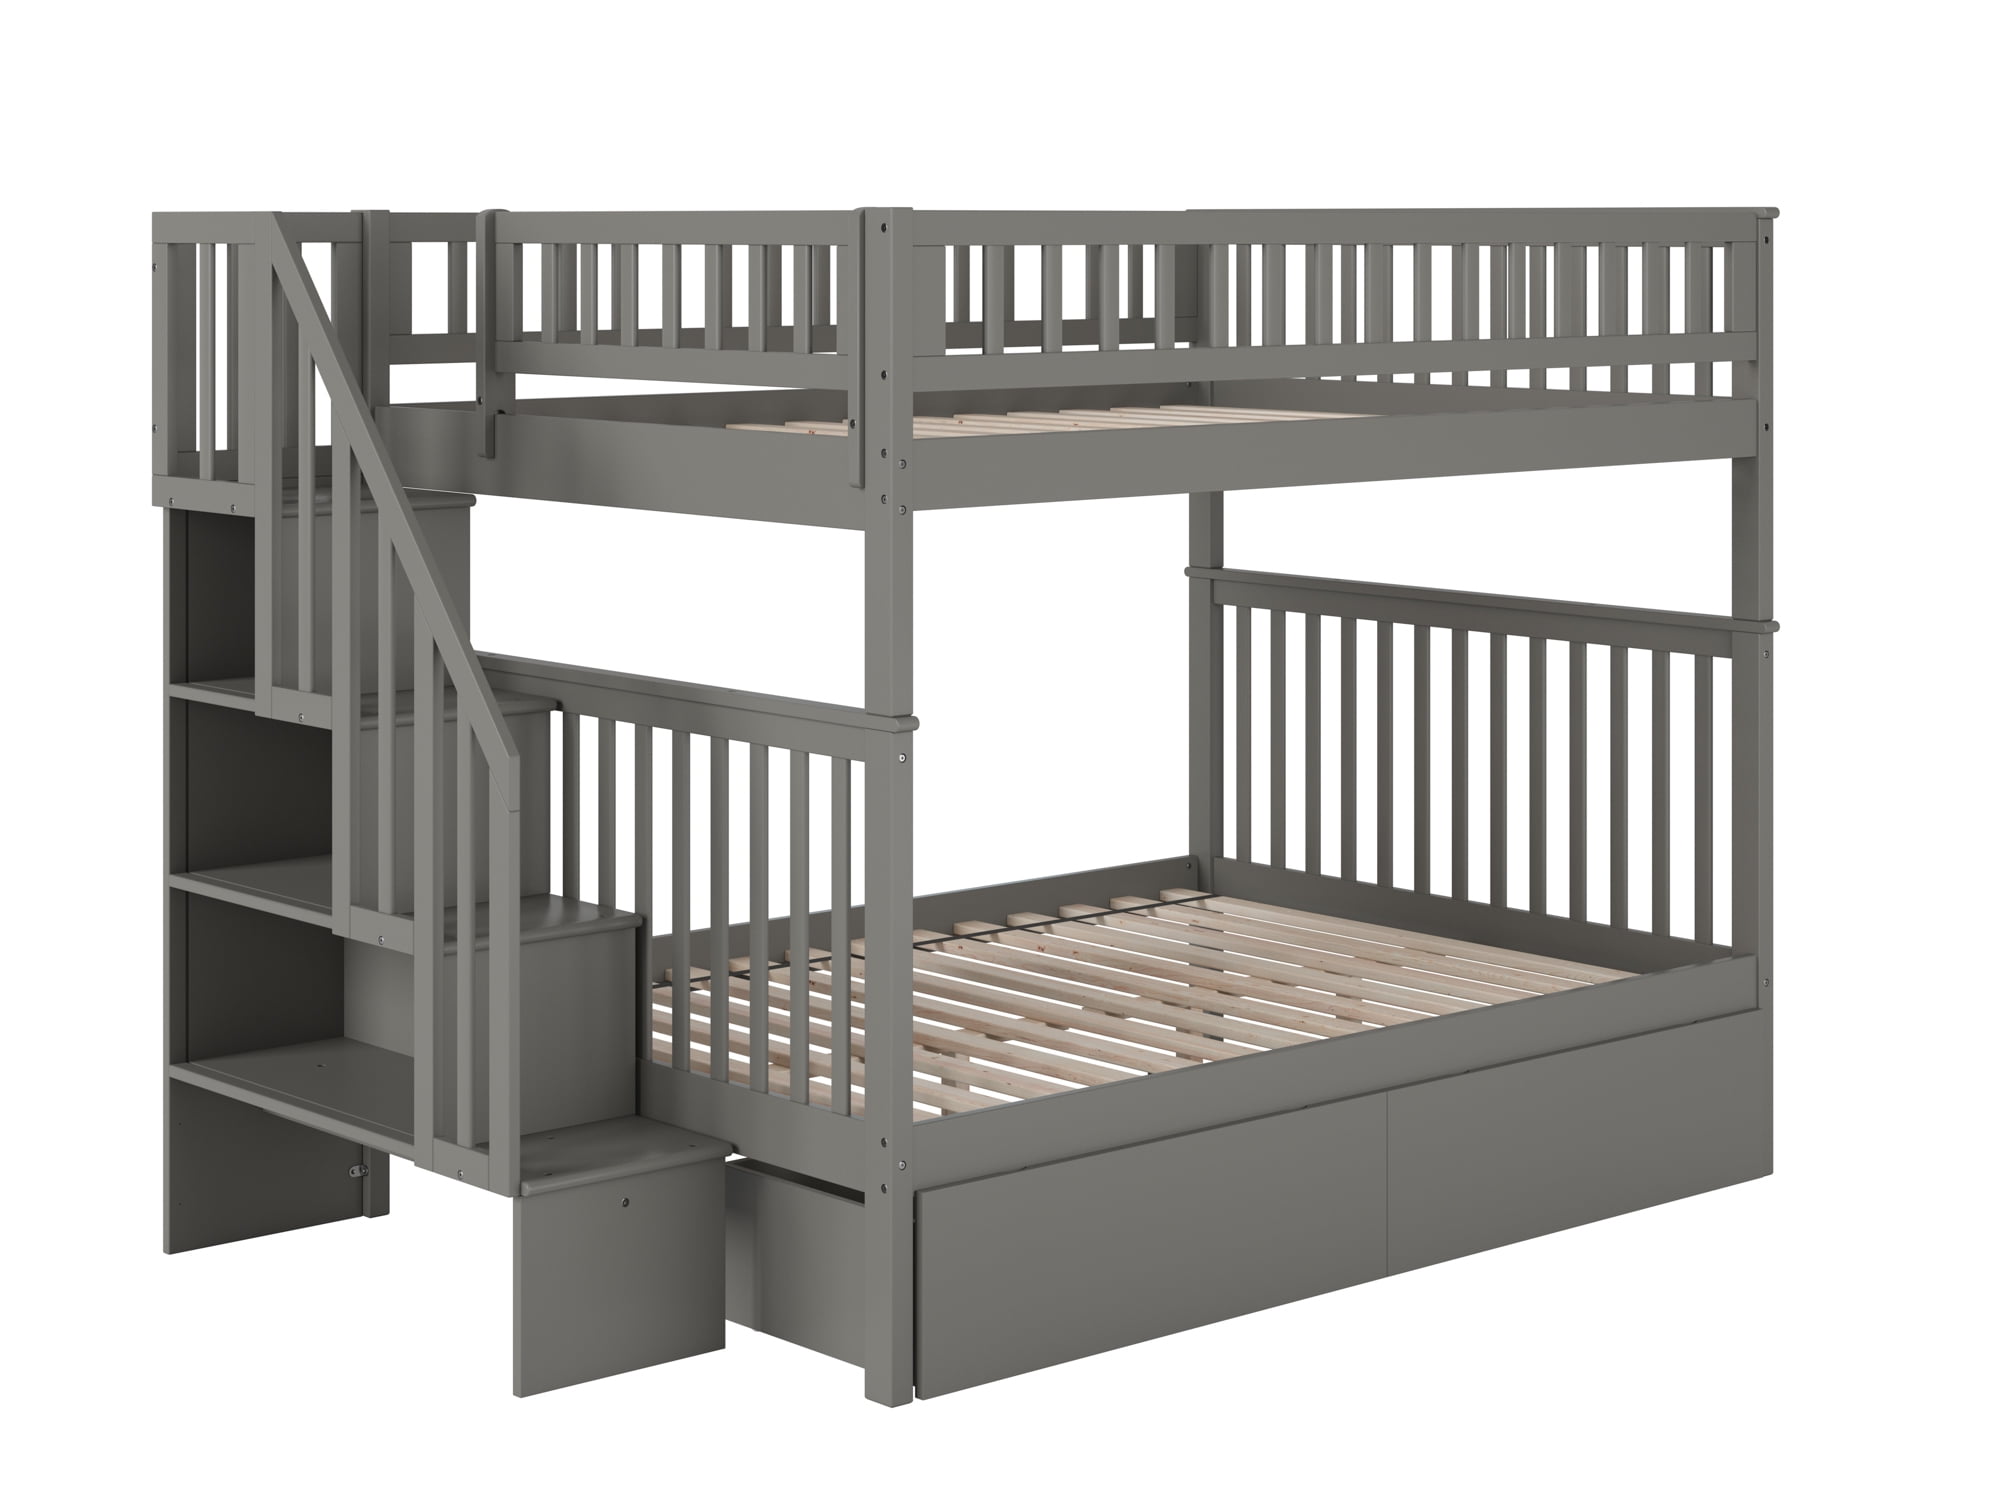 Woodland Staircase Bunk Bed Full Over, Woodland Bunk Bed With Trundle